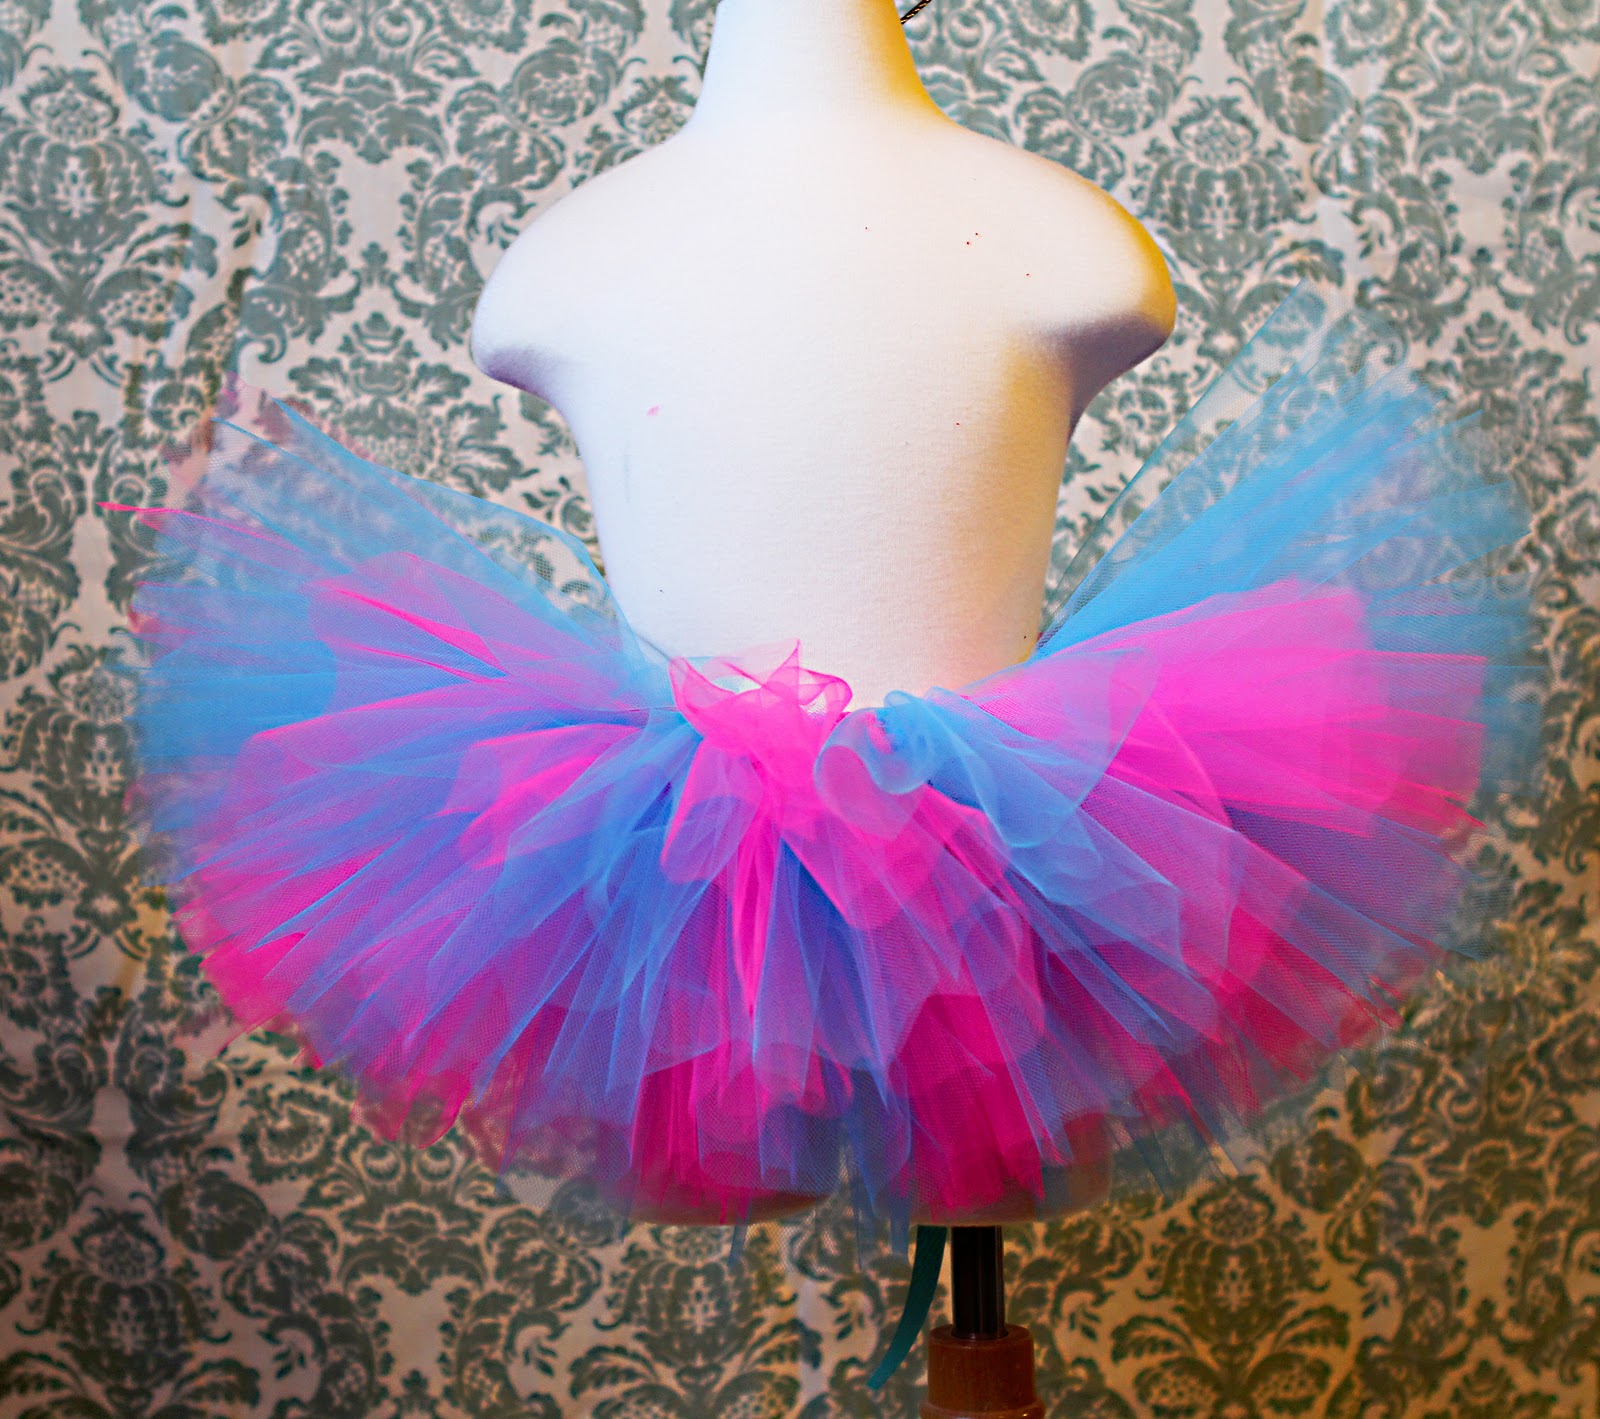 How To: Lets start with the basics on making a no sew tutu